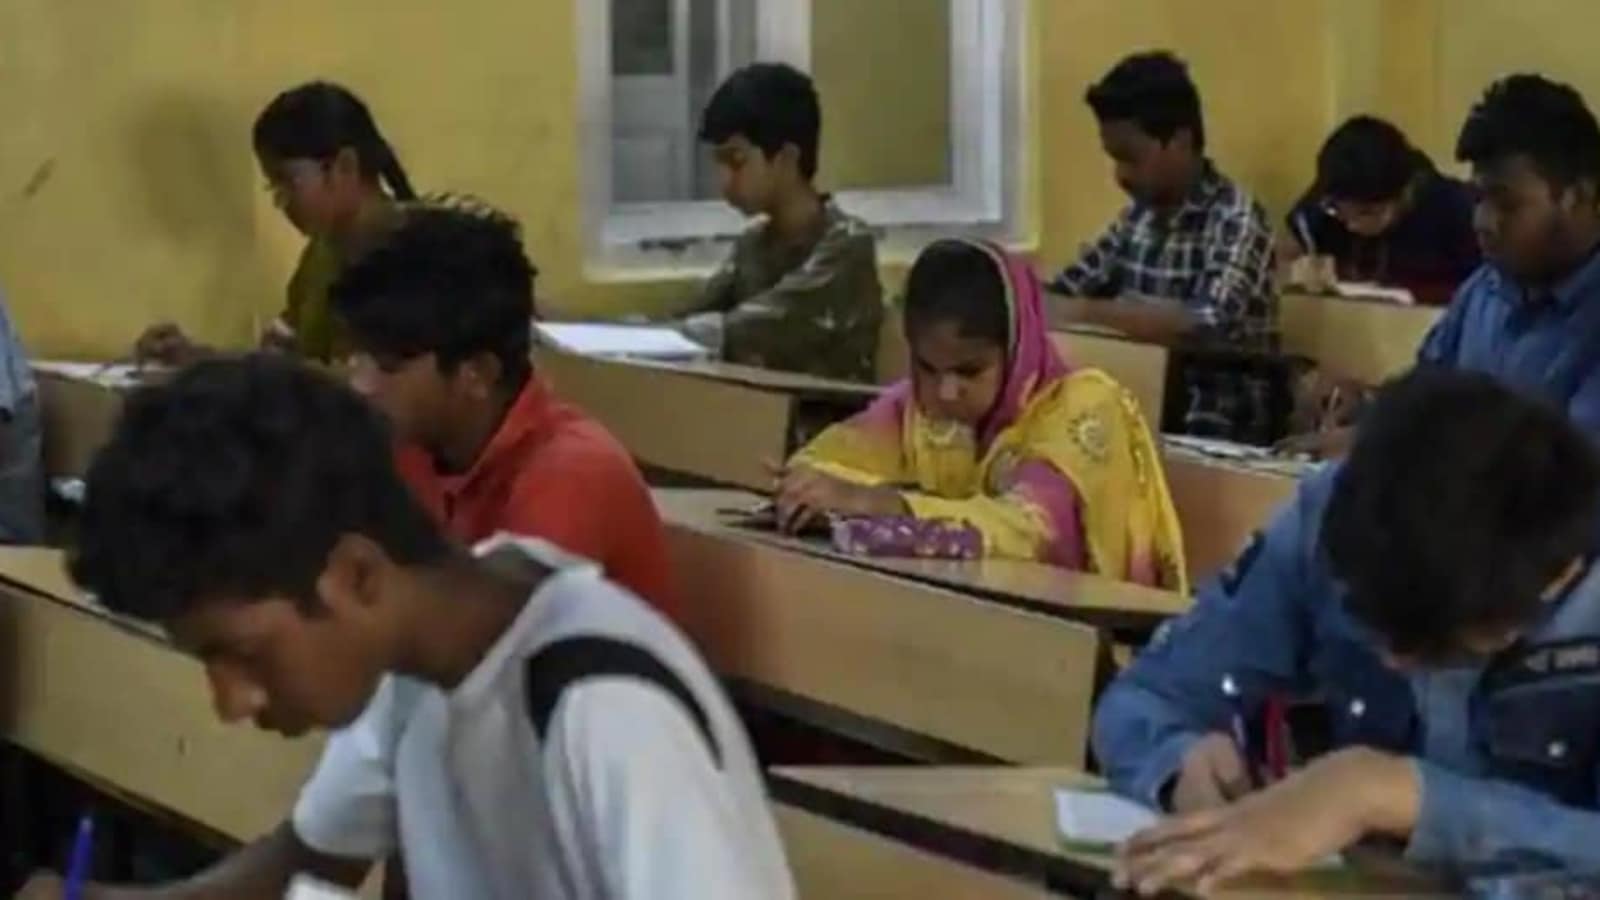 Bihar 67th combined competitive prelims exam on January 23: BPSC